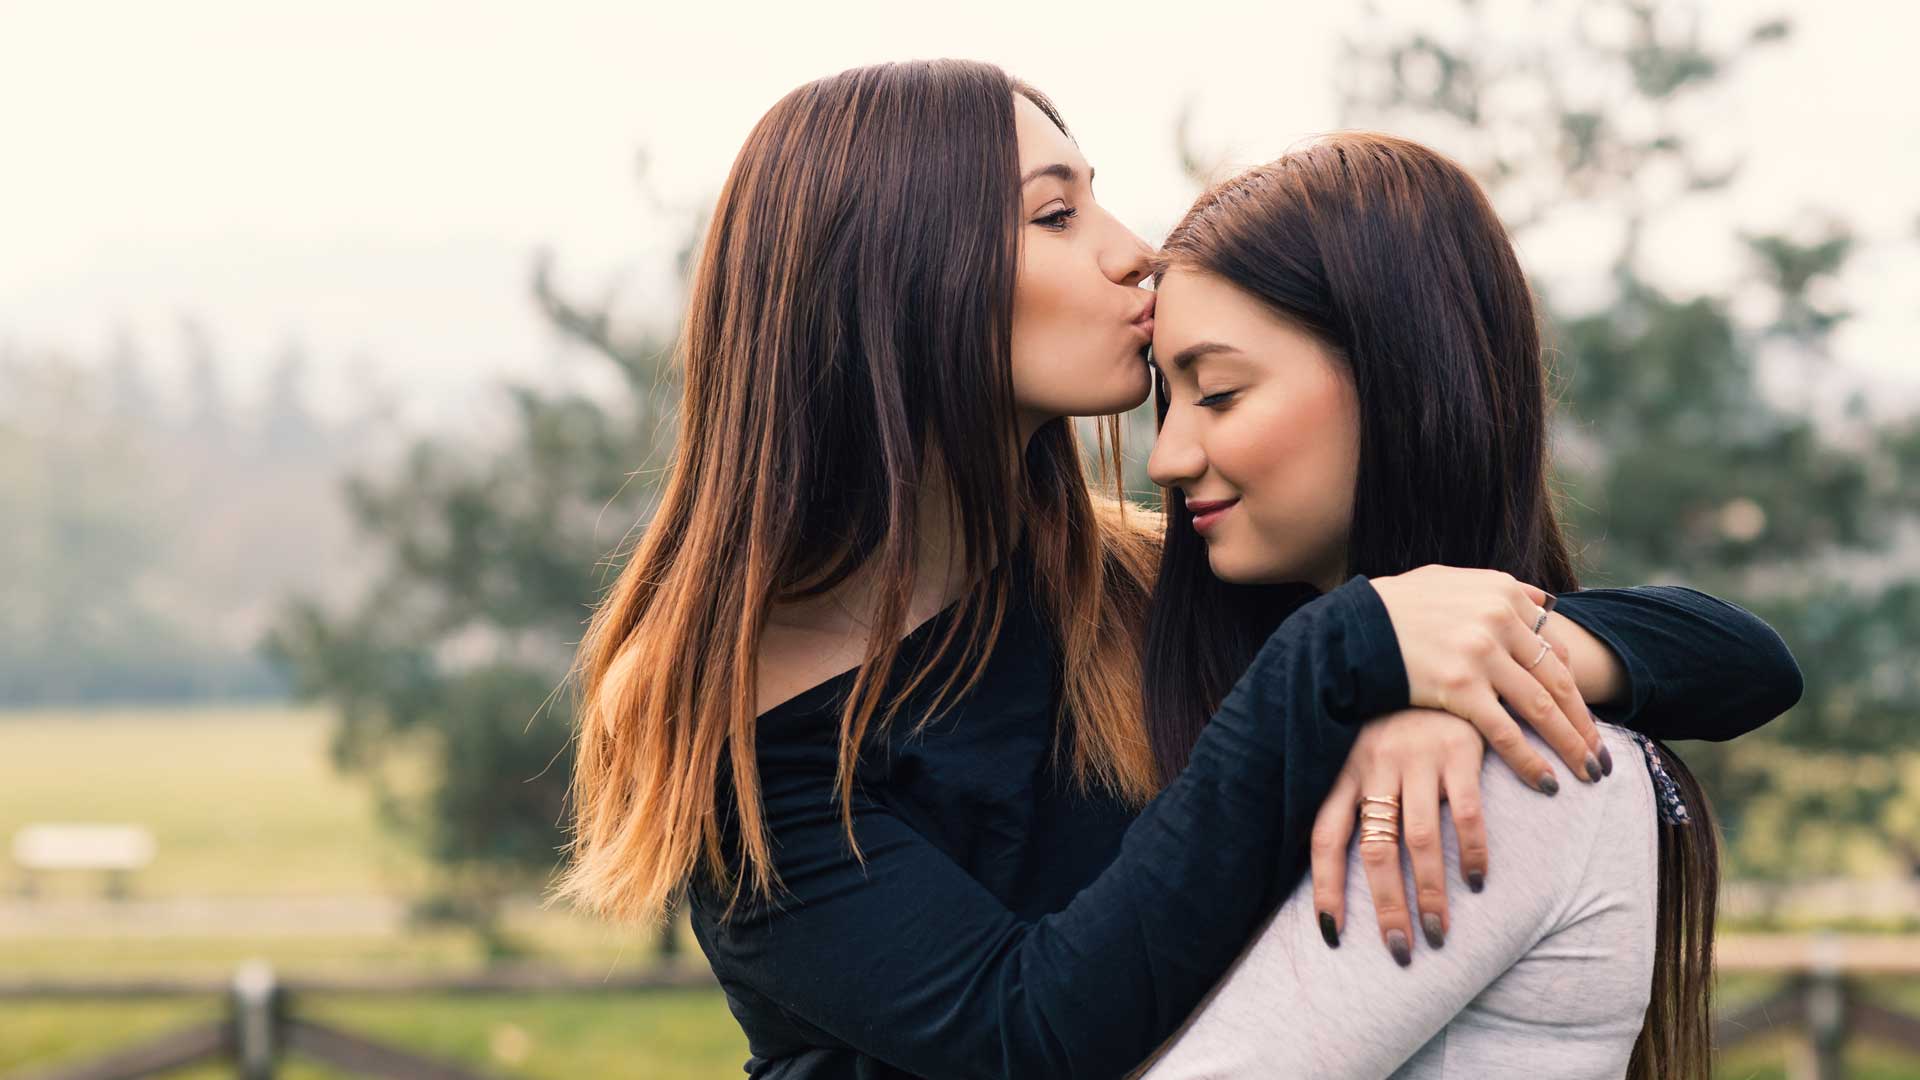 Portrait of young sisters hugging and kissing outdoors in a park